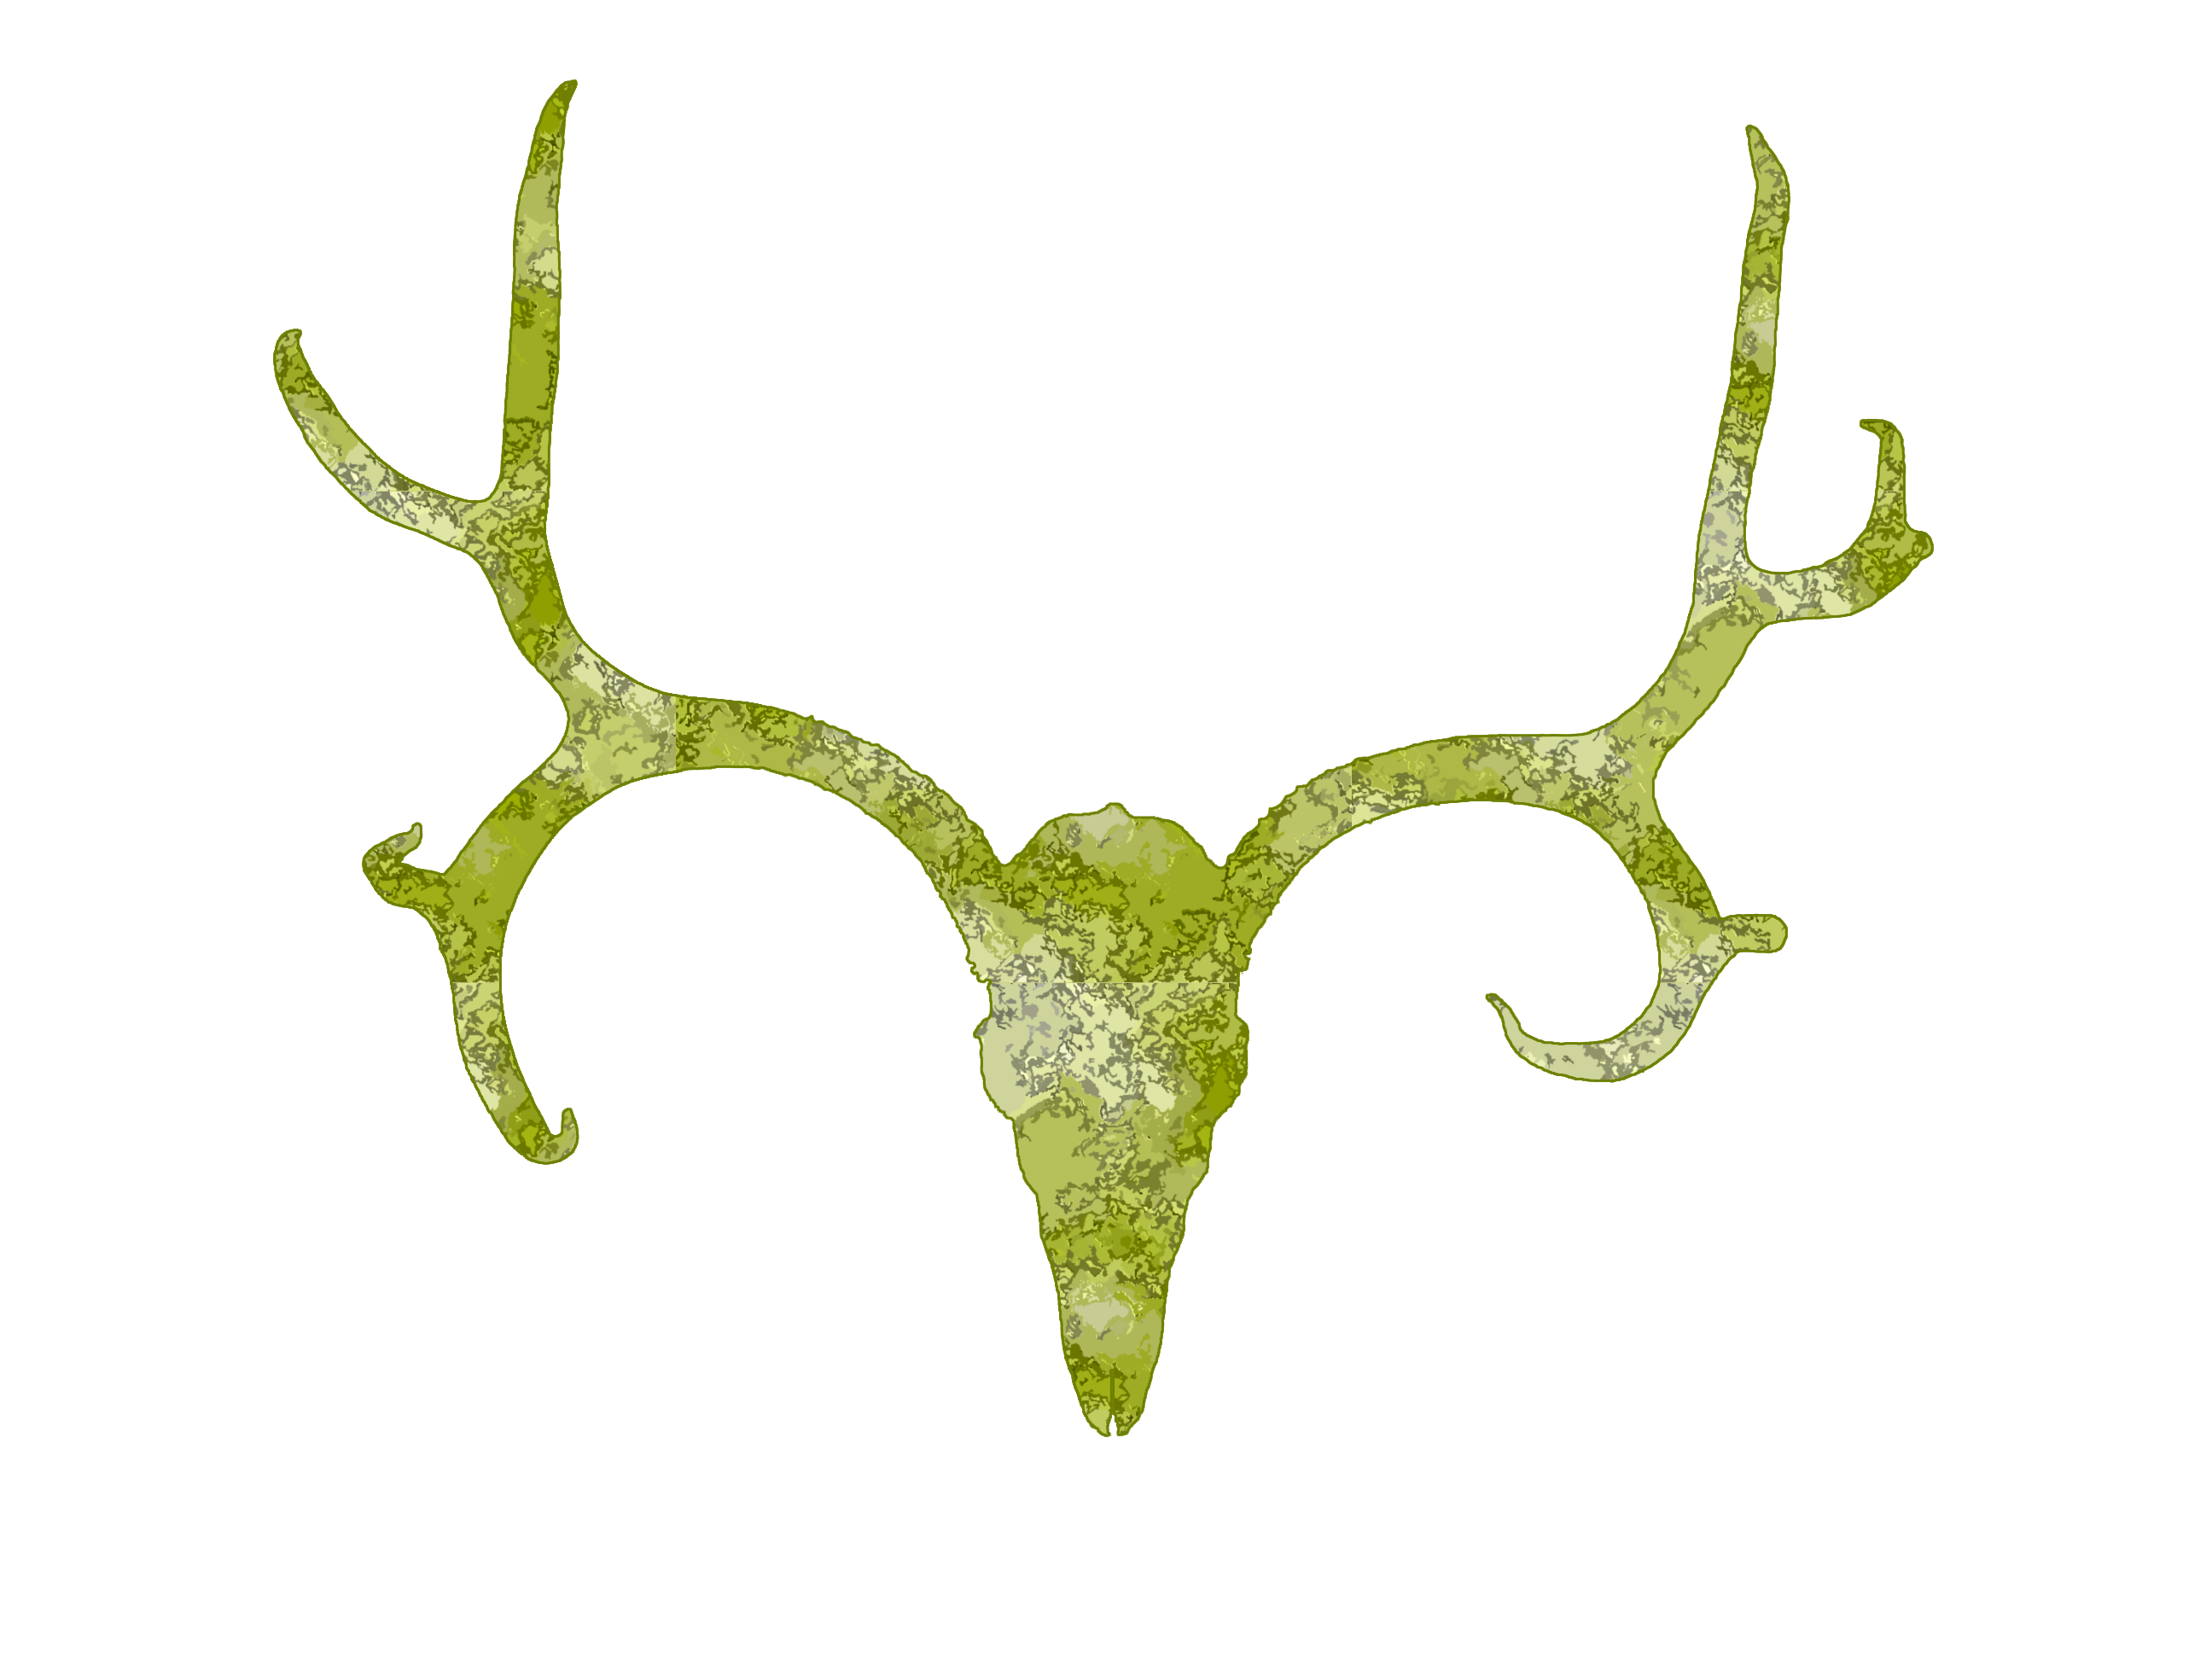 Deer Antlers Clipart Black And White - Free ...